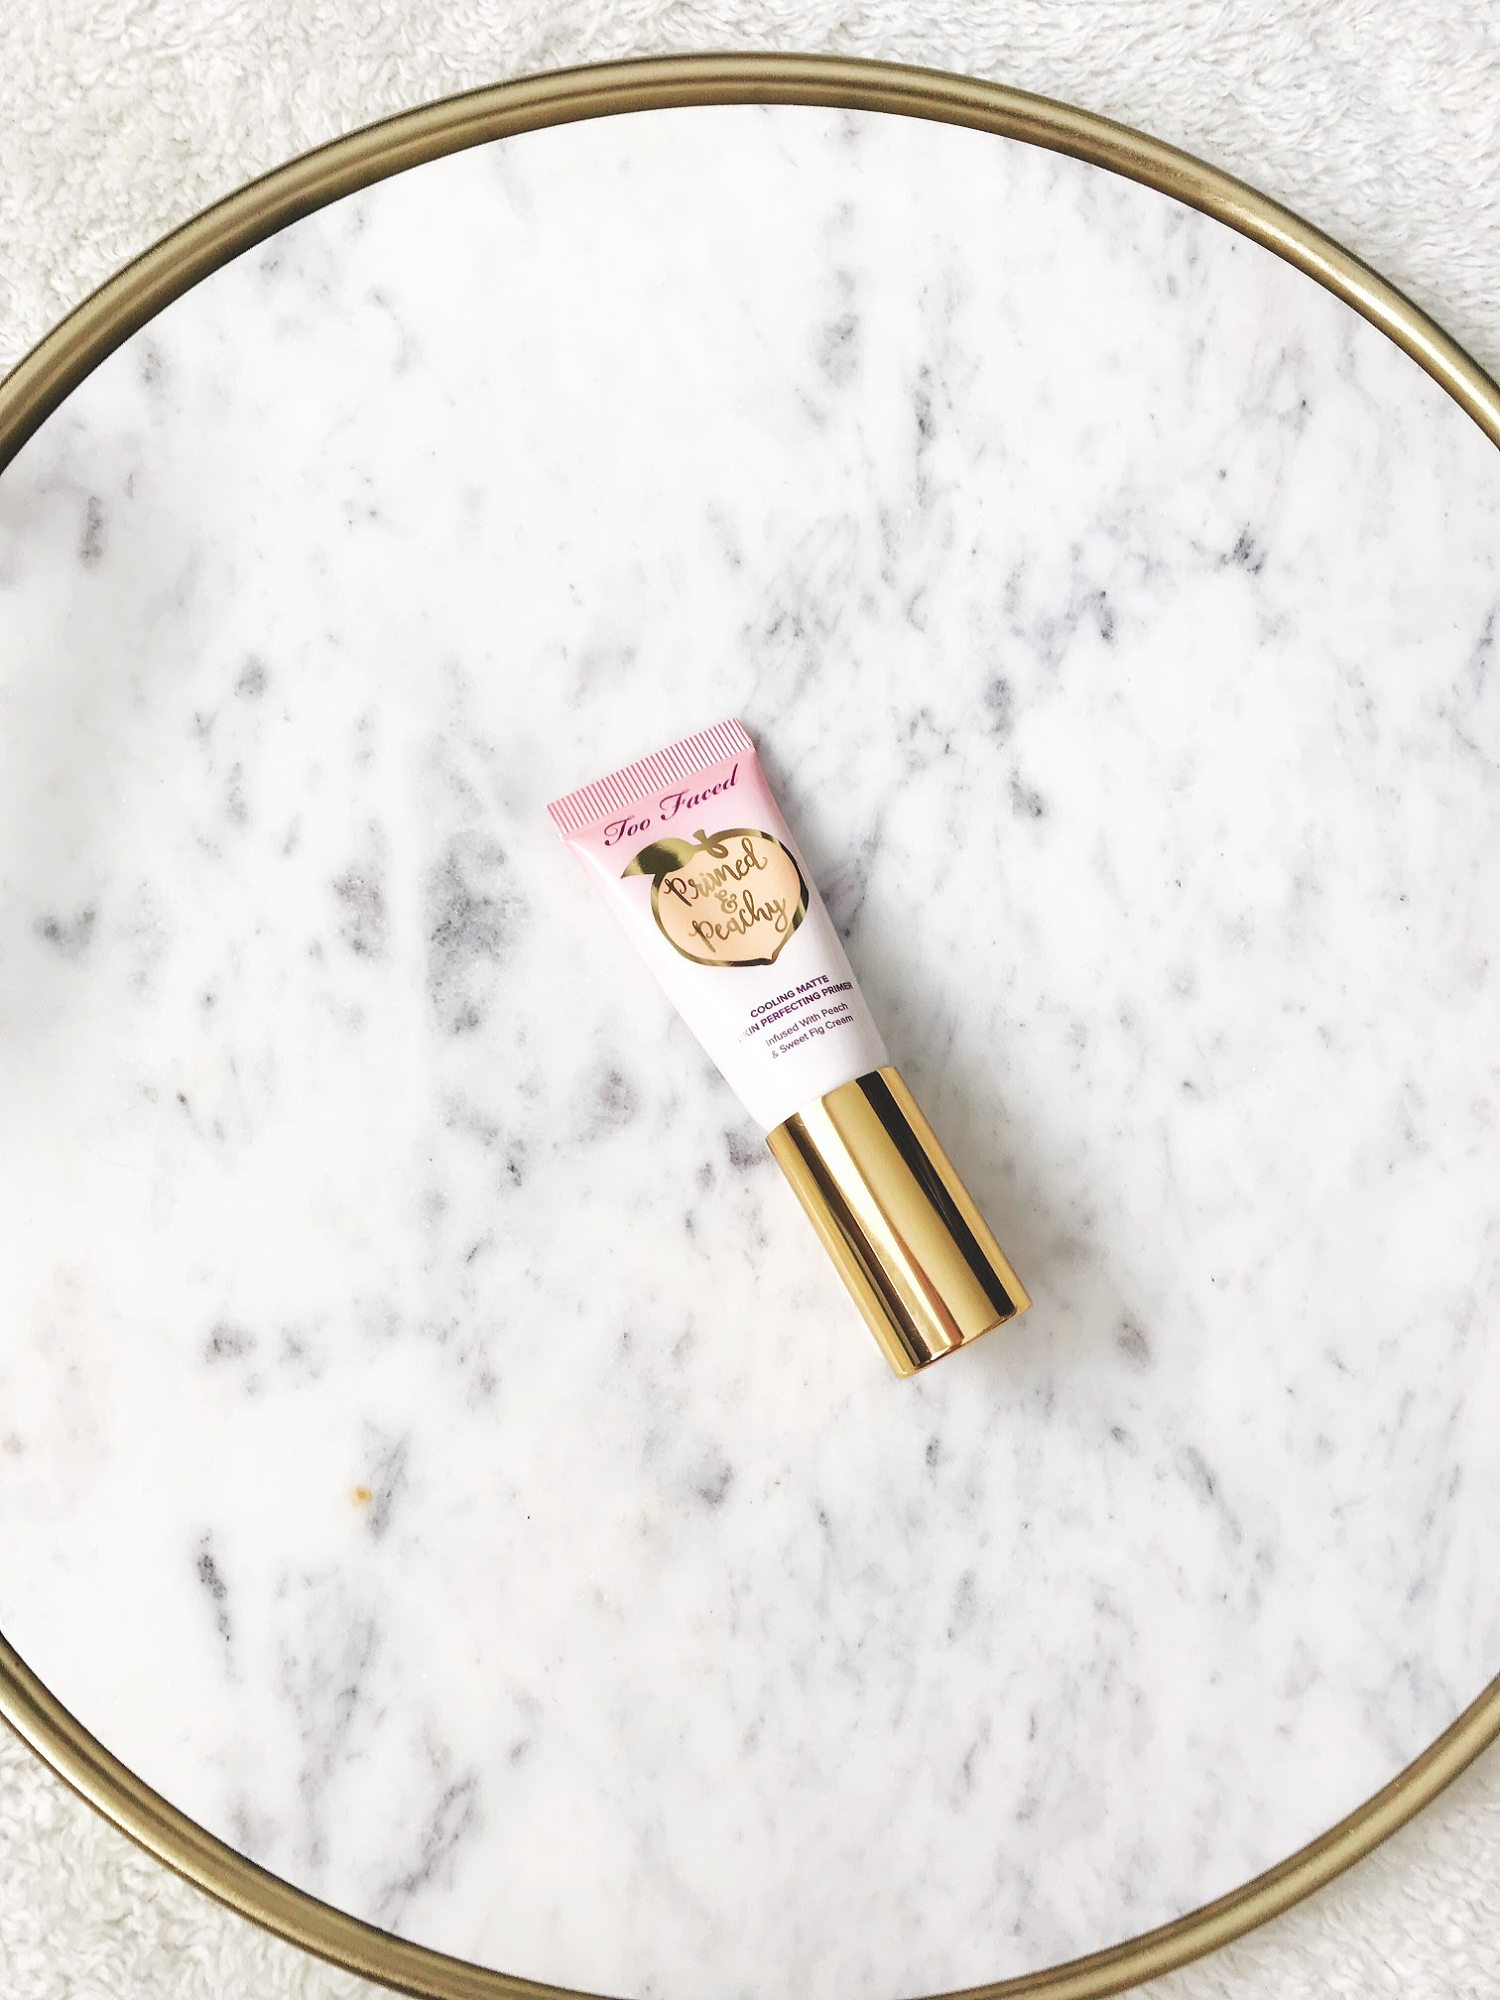 STH 6 Beauty Products I'm Currently Loving-Too Faced Primed and Peachy Primer